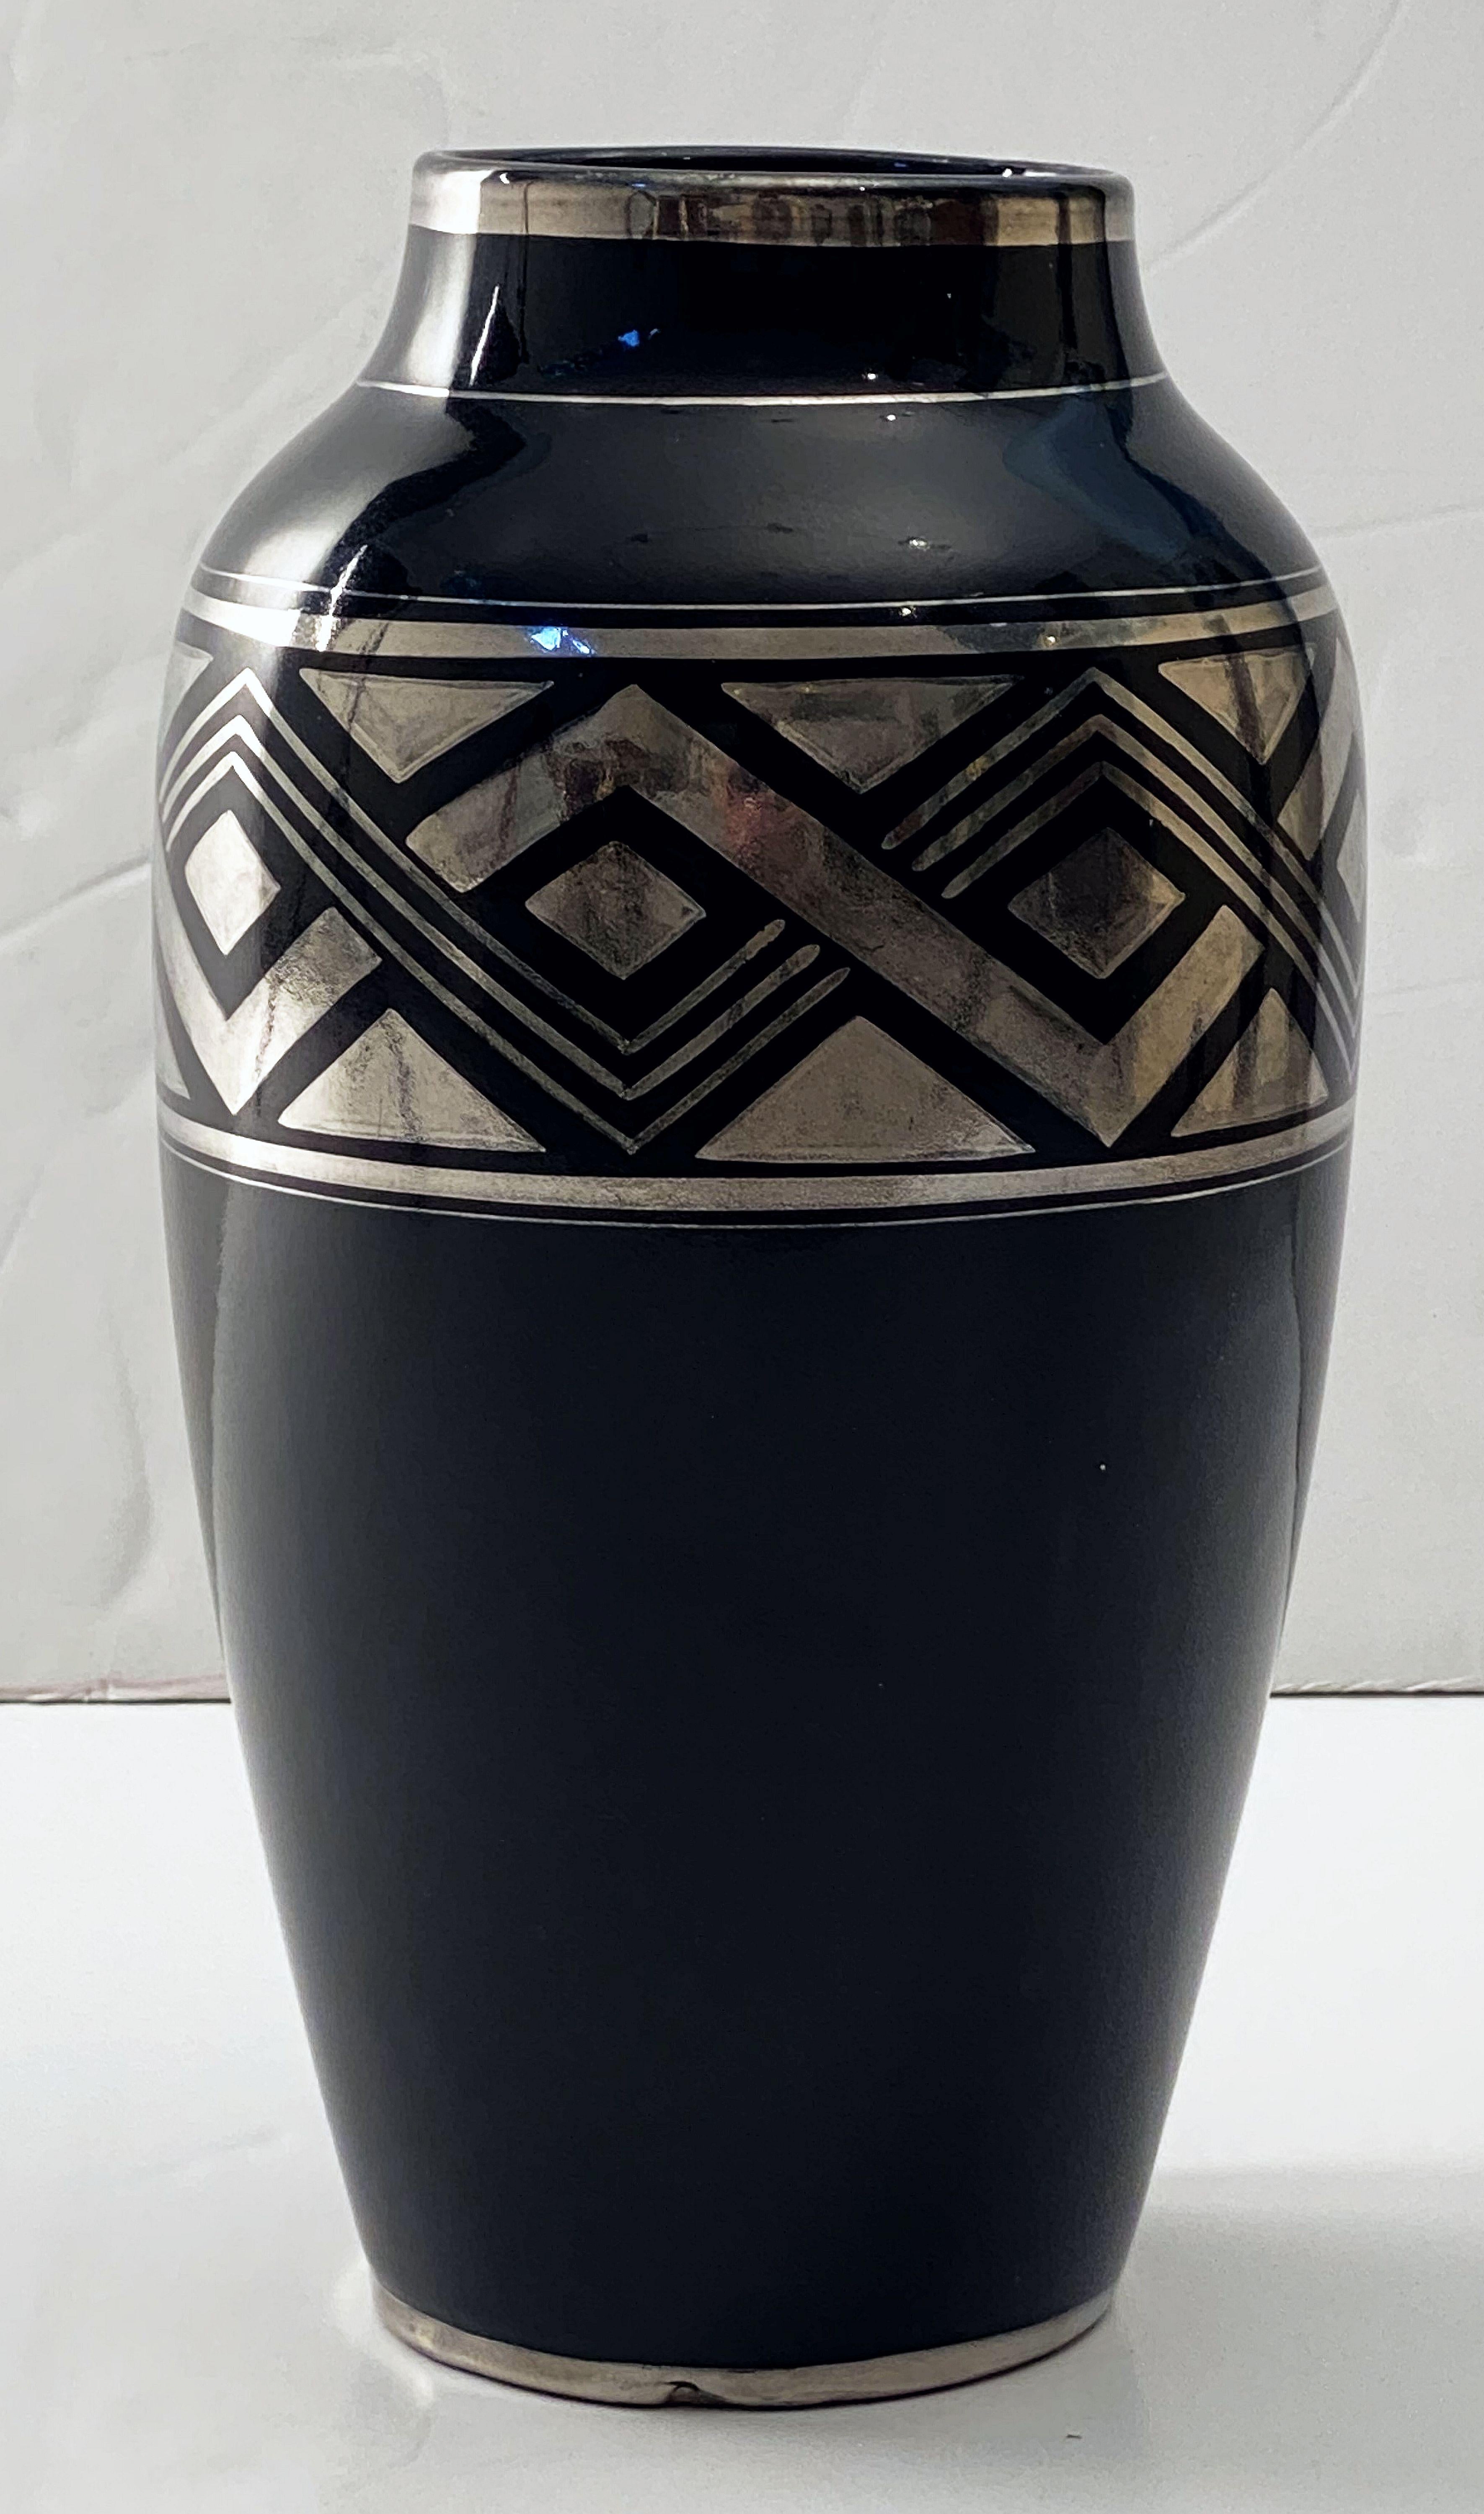 A fine French Art Deco black vase featuring a striking geometric design in silver around the circumference, by the celebrated designers, Odette Berlot and Yvonne Mussier, or ODYV, who were prominent in the Art Deco period.

Two